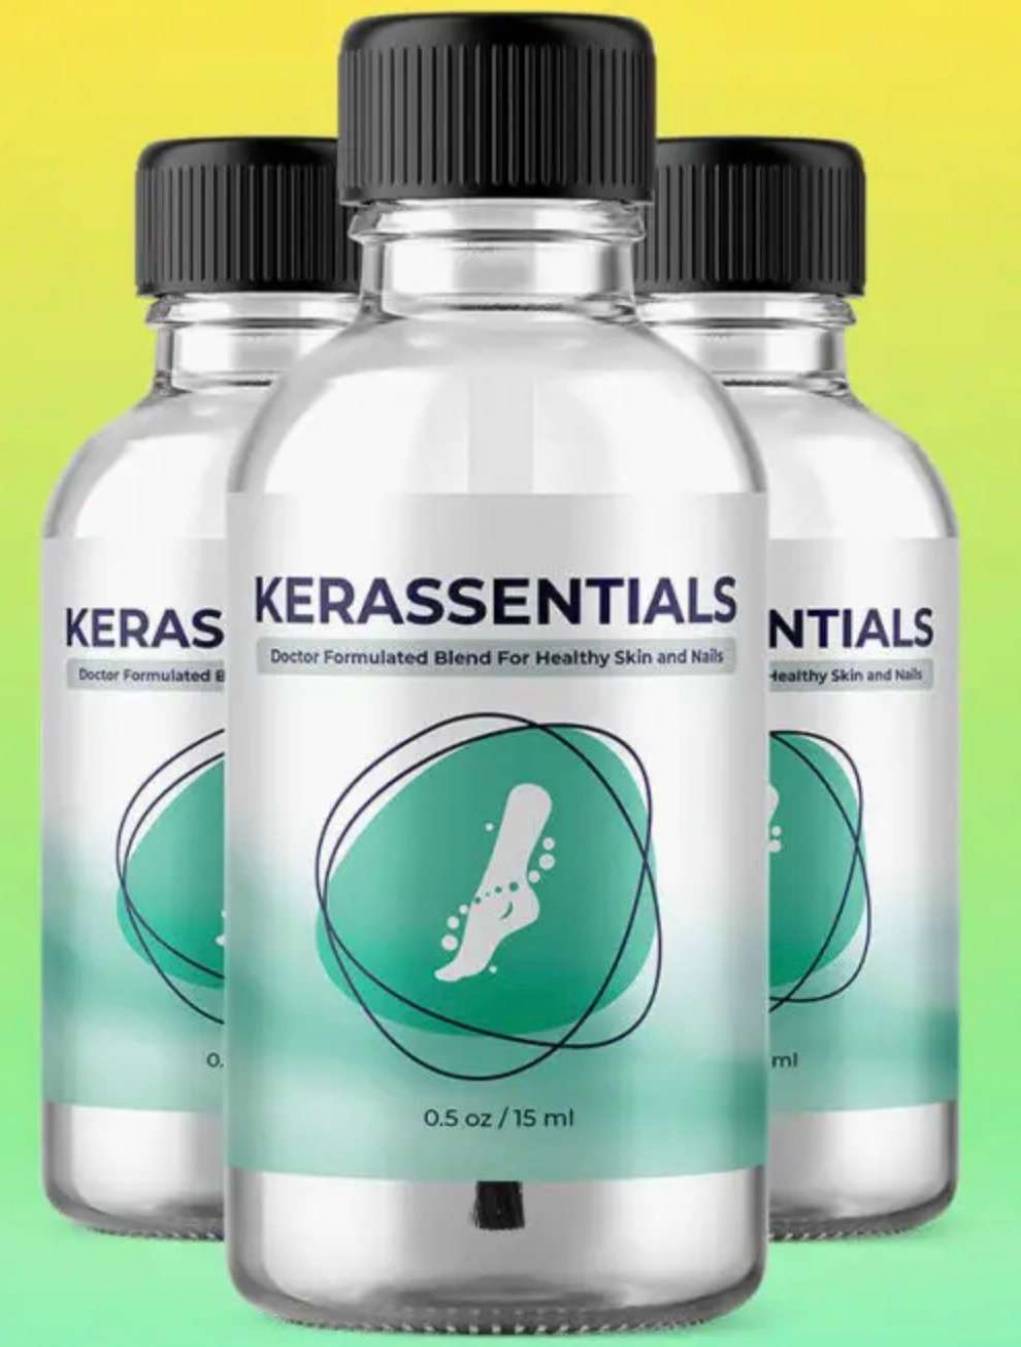 Customer Opinions About Kerassentials